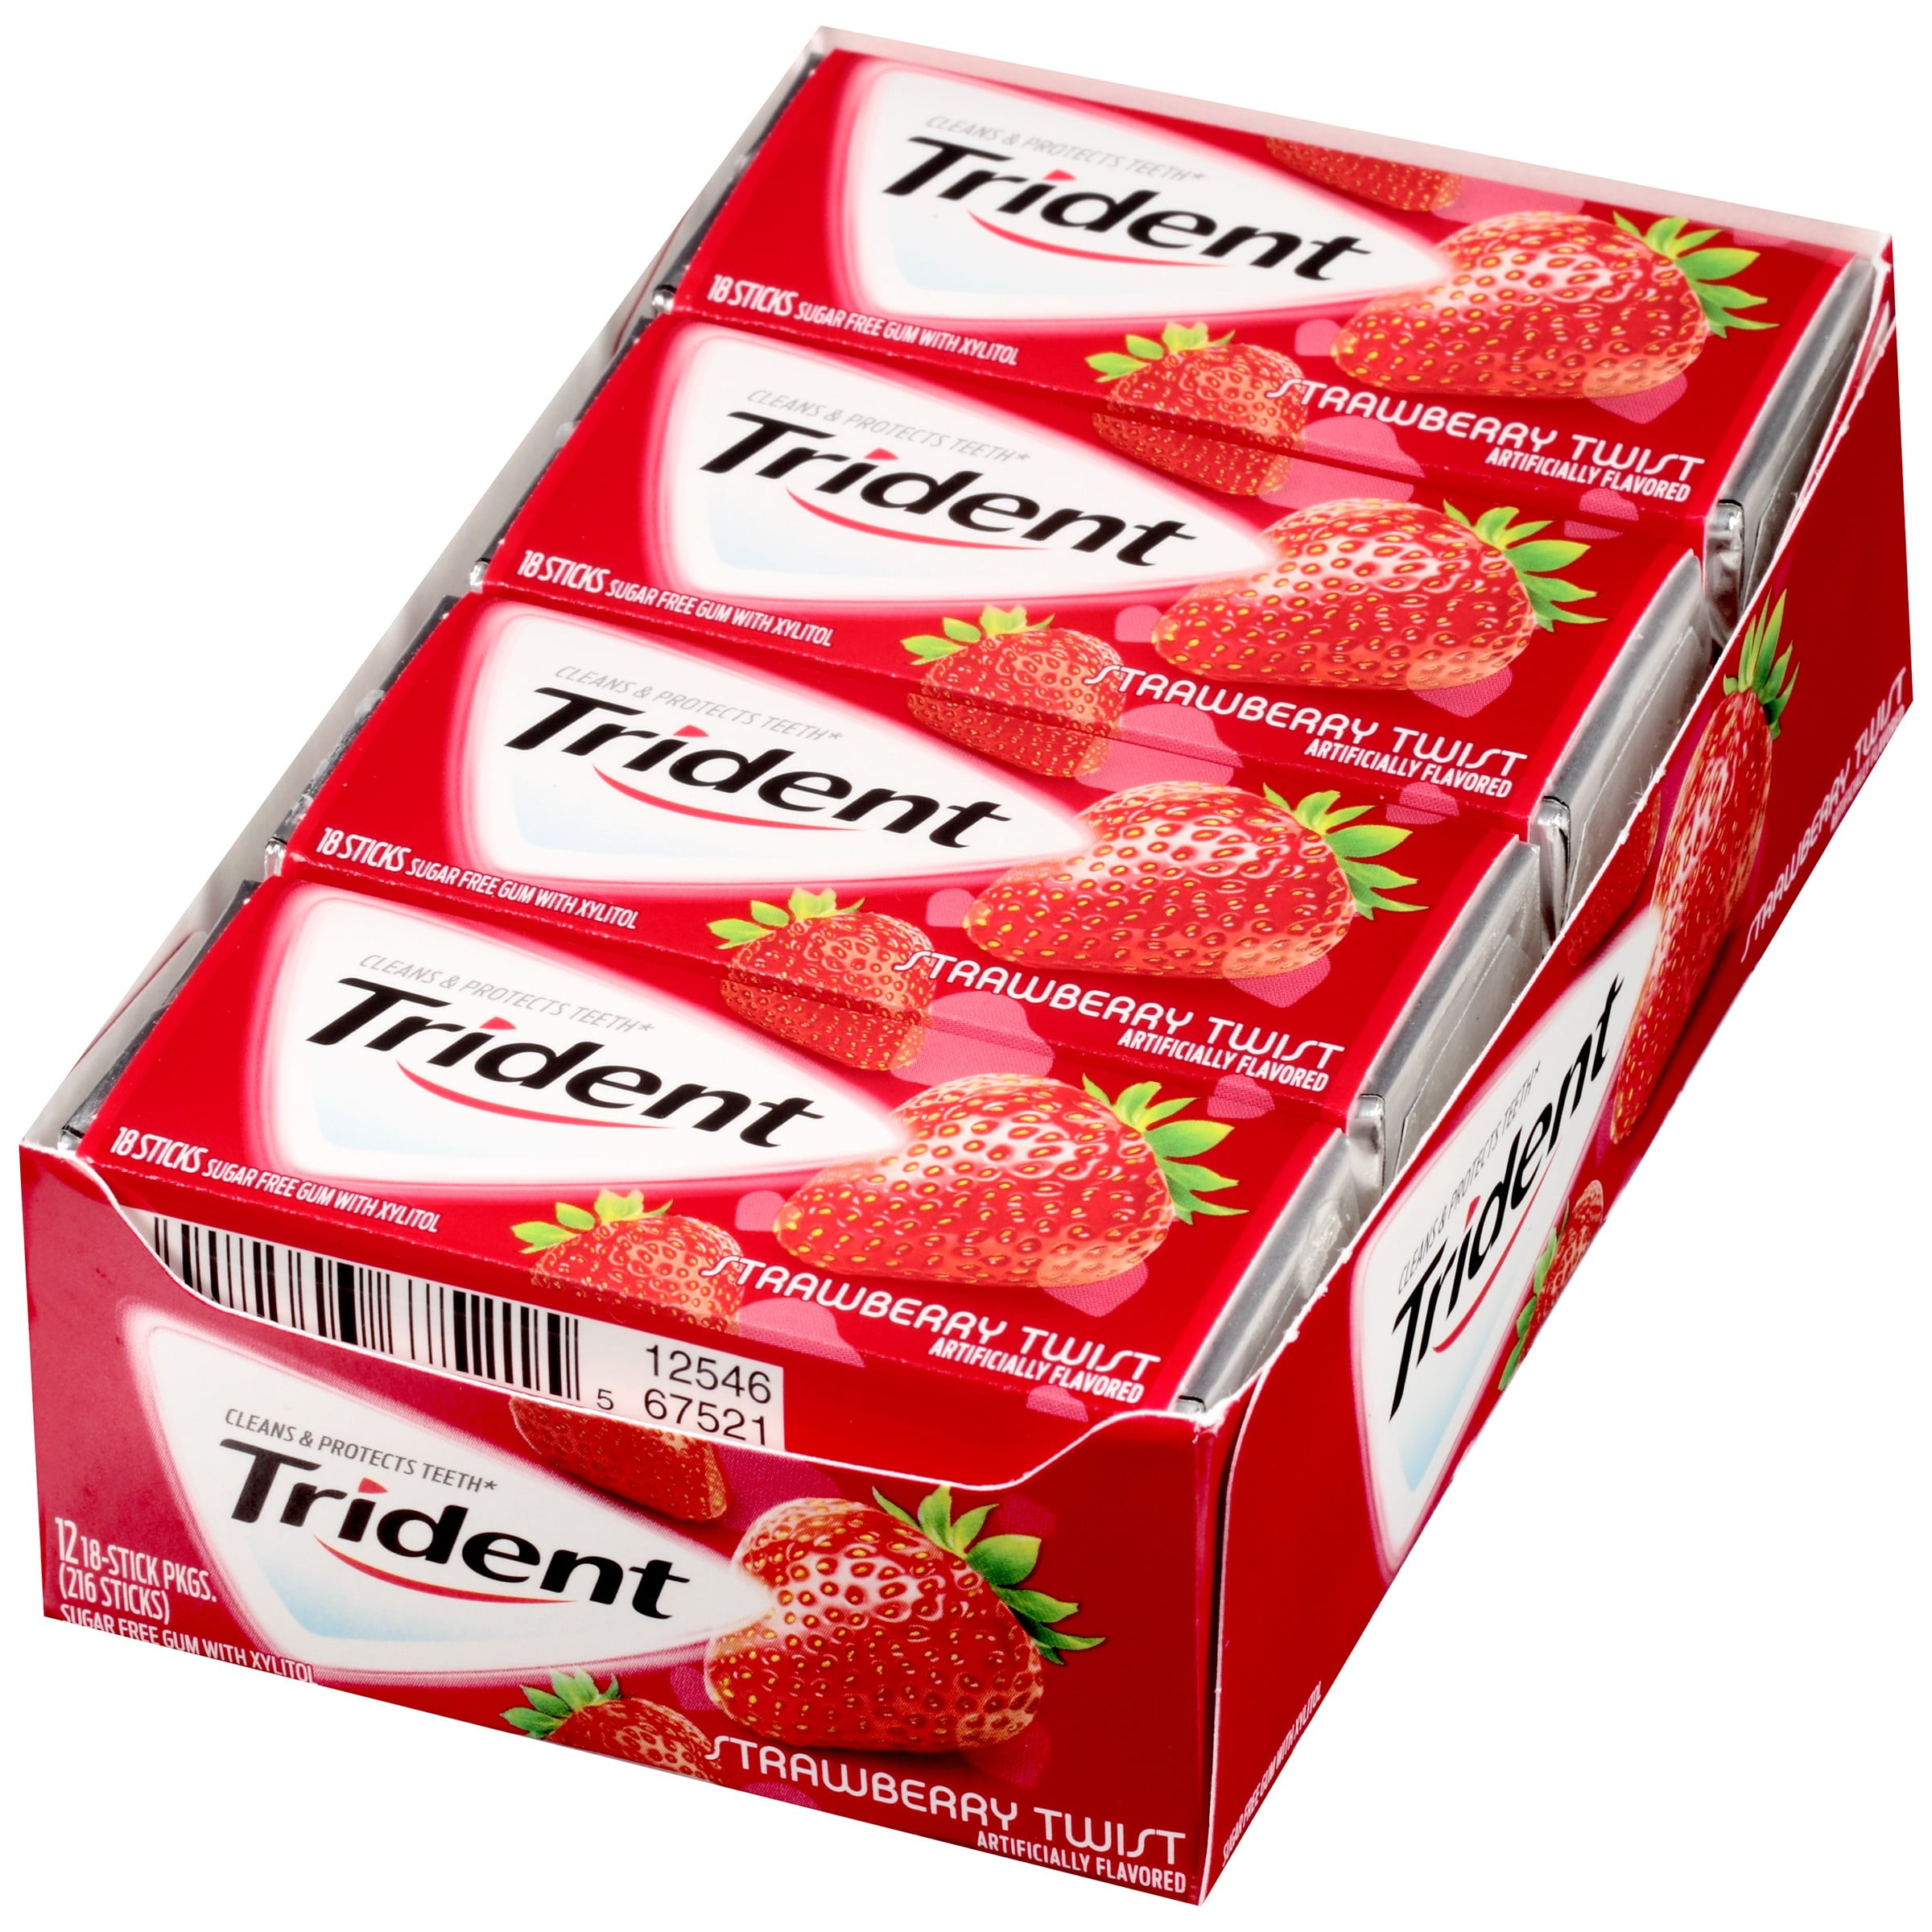 Miradent Xylitol Chewing Gum for Kids - Strawberry Flavour - Net